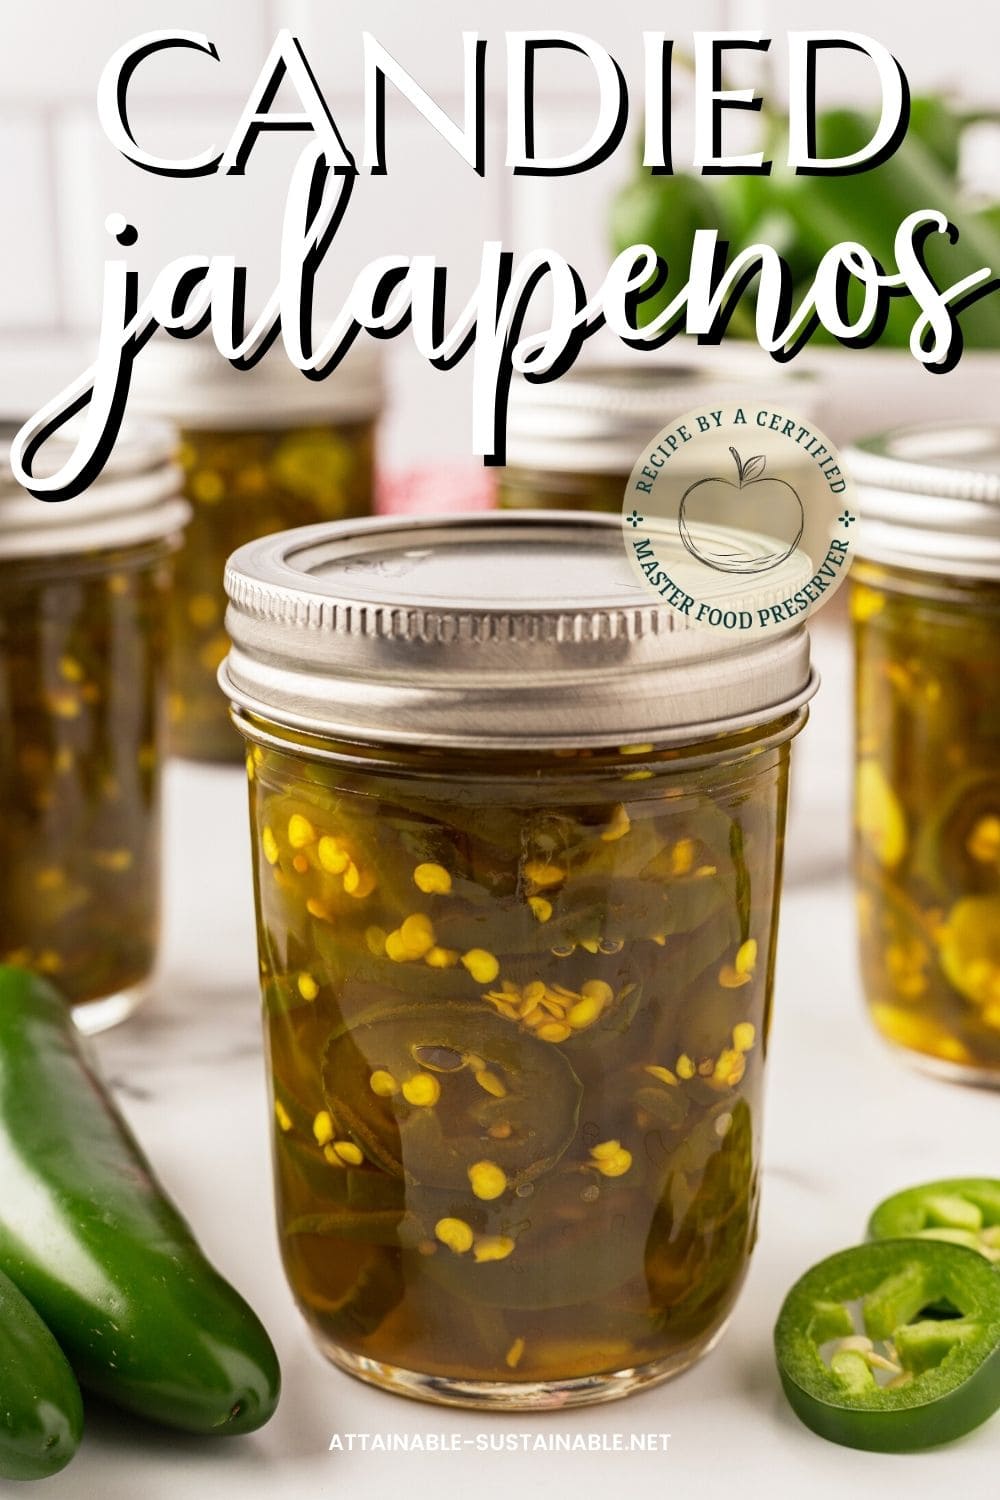 jars of home canned candied jalapeno peppers.